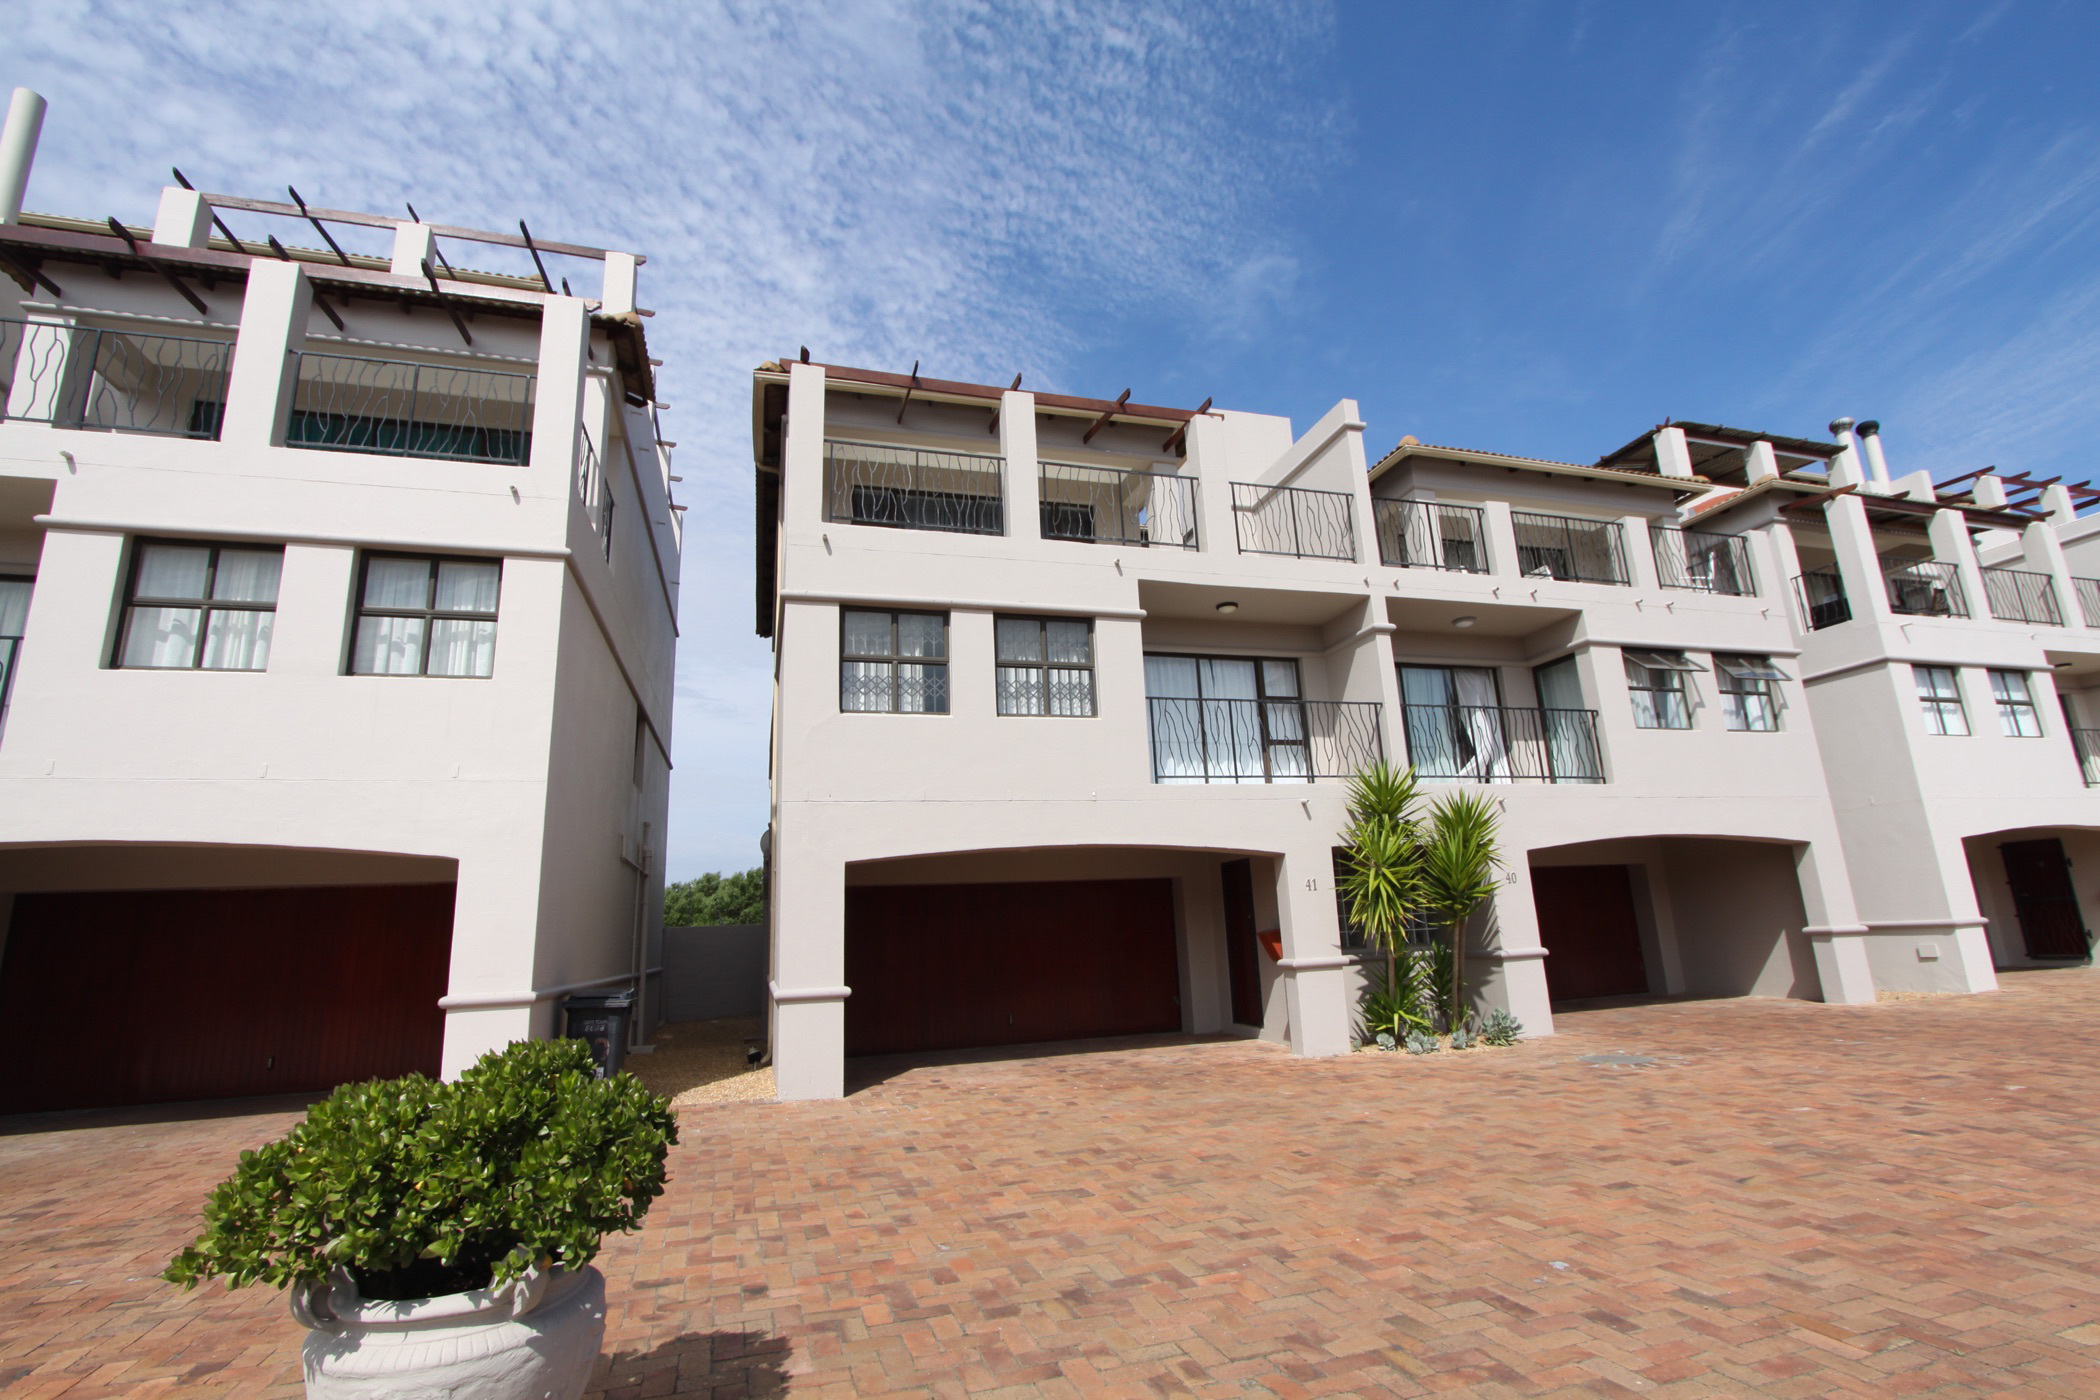 3 bedroom house for sale in Bloubergstrand